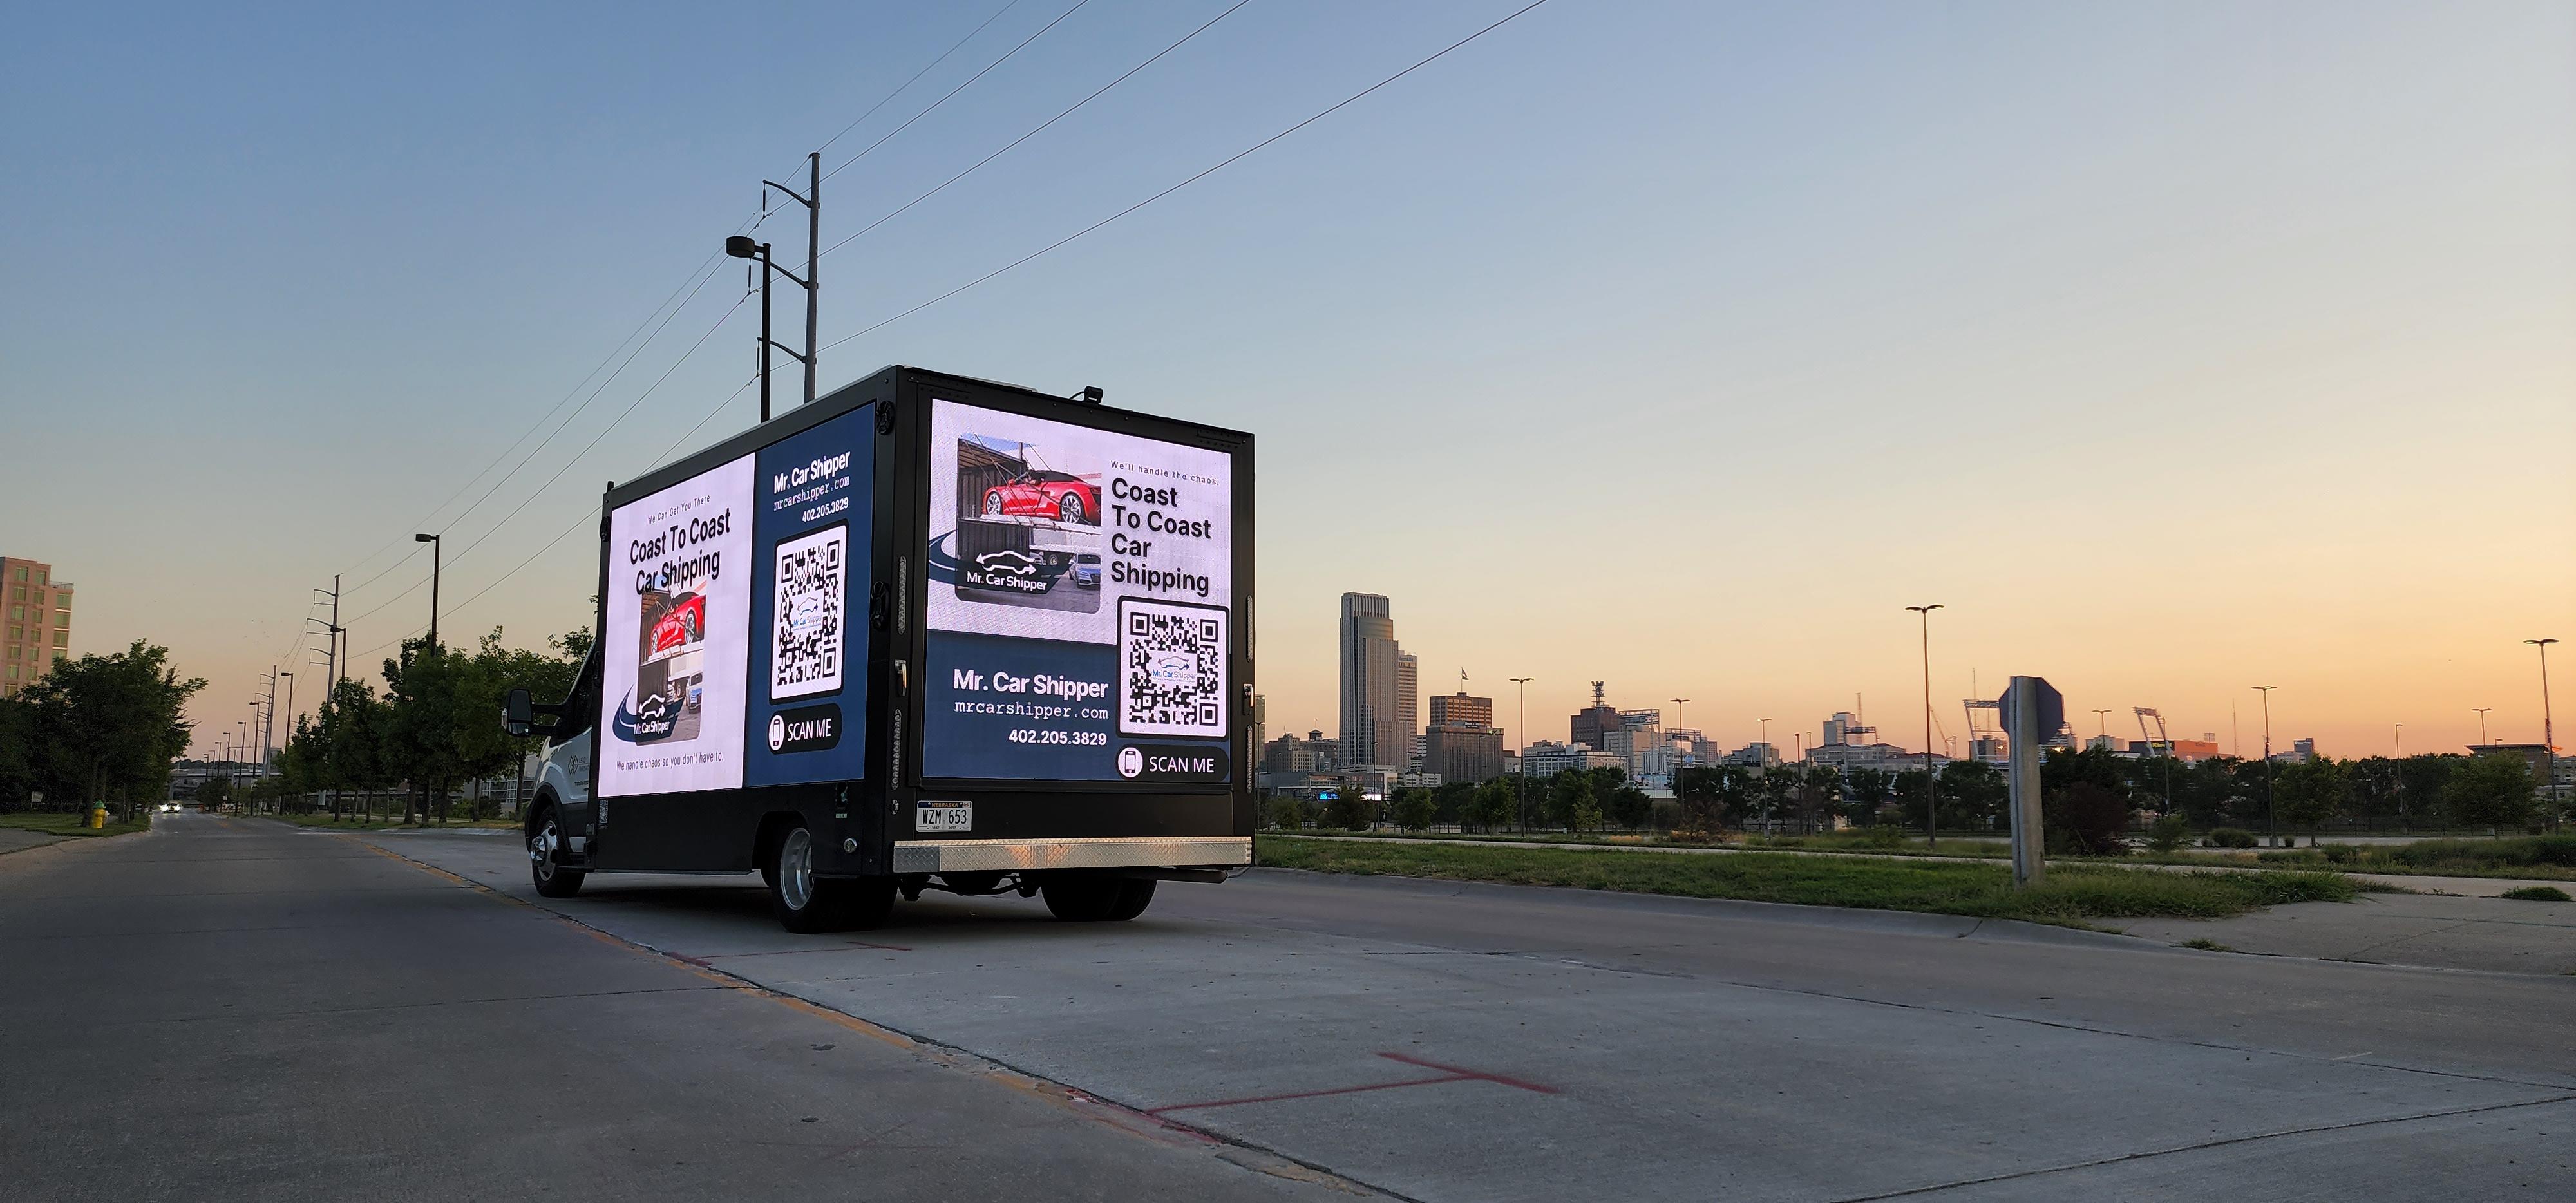 Lead Innovations mobile digital billboard truck in Omaha NE with ad for Mr. Car Shipper